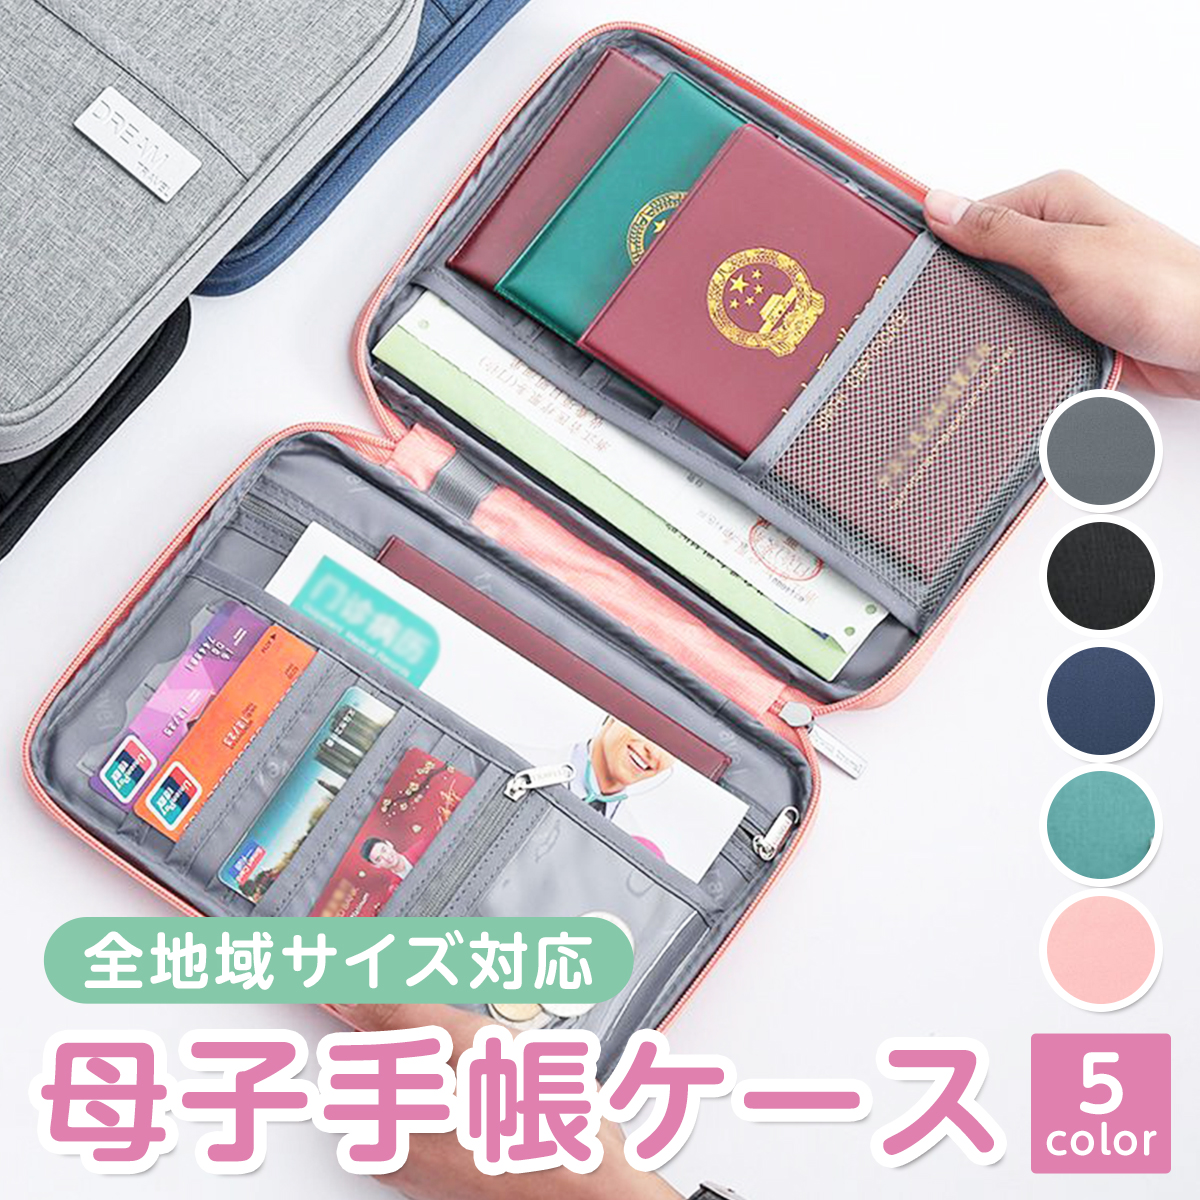 .. pocketbook case . medicine notebook examination ticket passbook travel stylish multi ..2 person 3 person size storage pocket passport high capacity guarantee proof water-repellent L size 